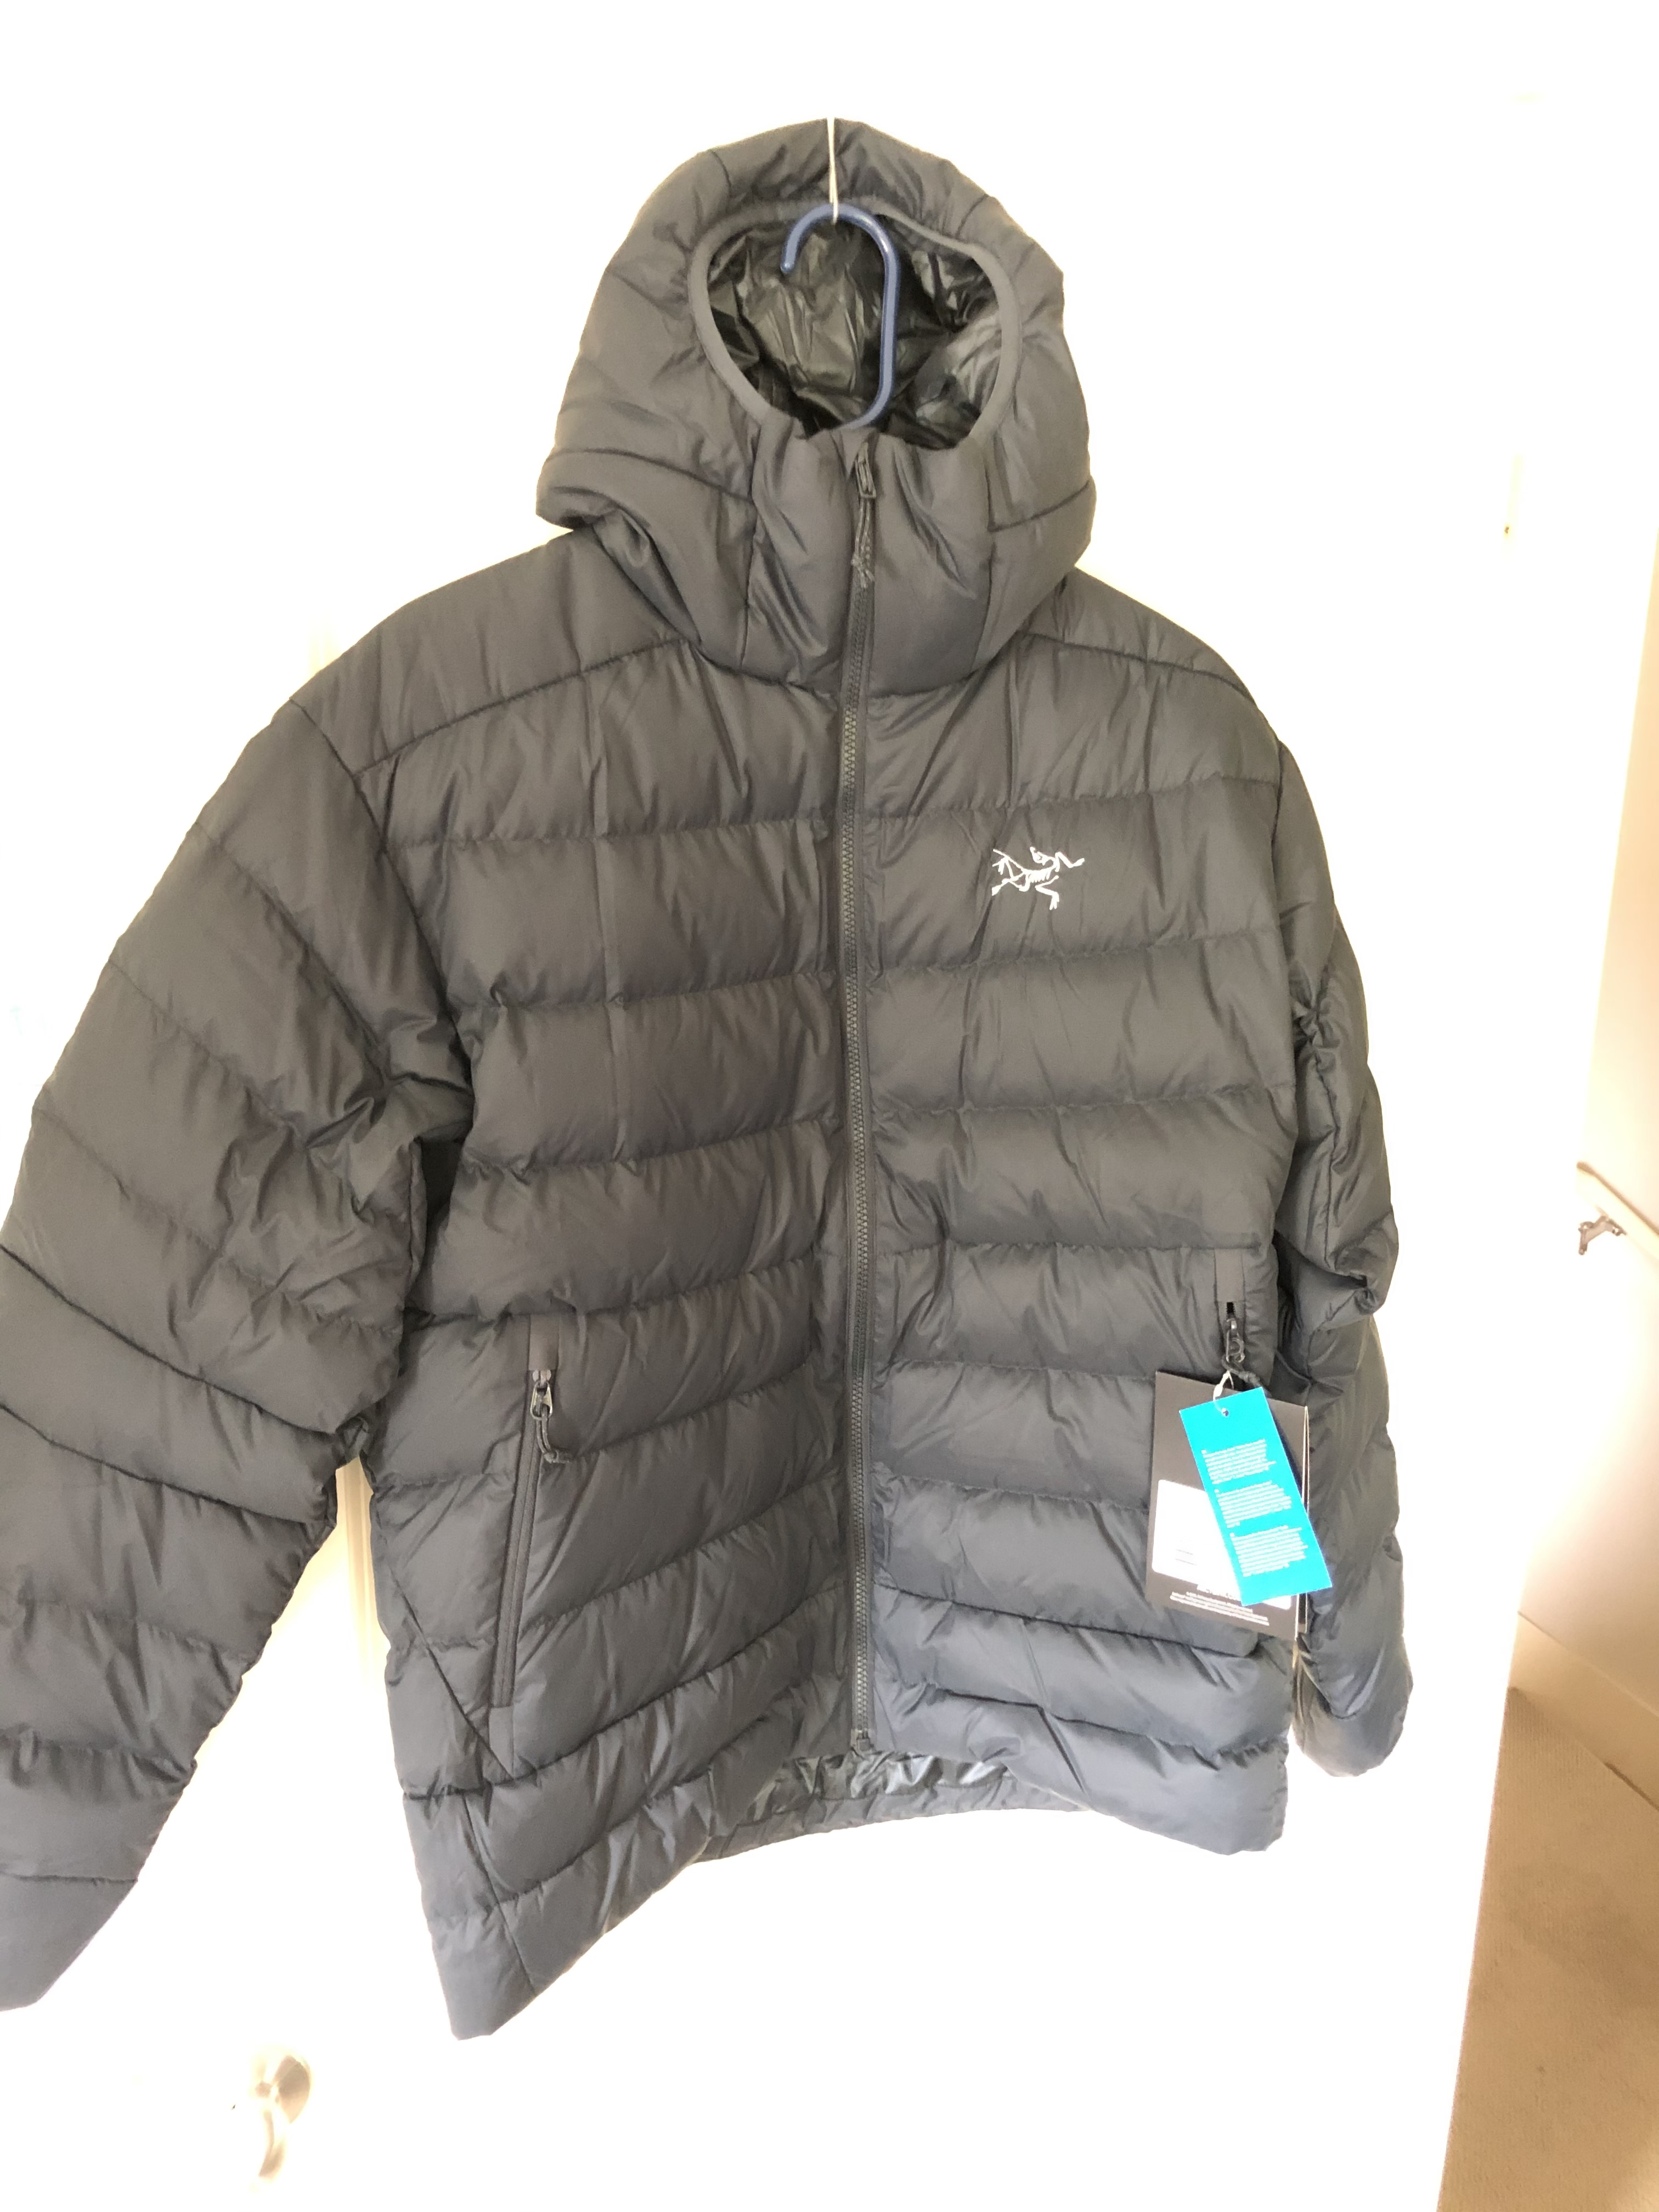 Arc'teryx Thorium AR Hoody M's large new with tags   The Yard Sale